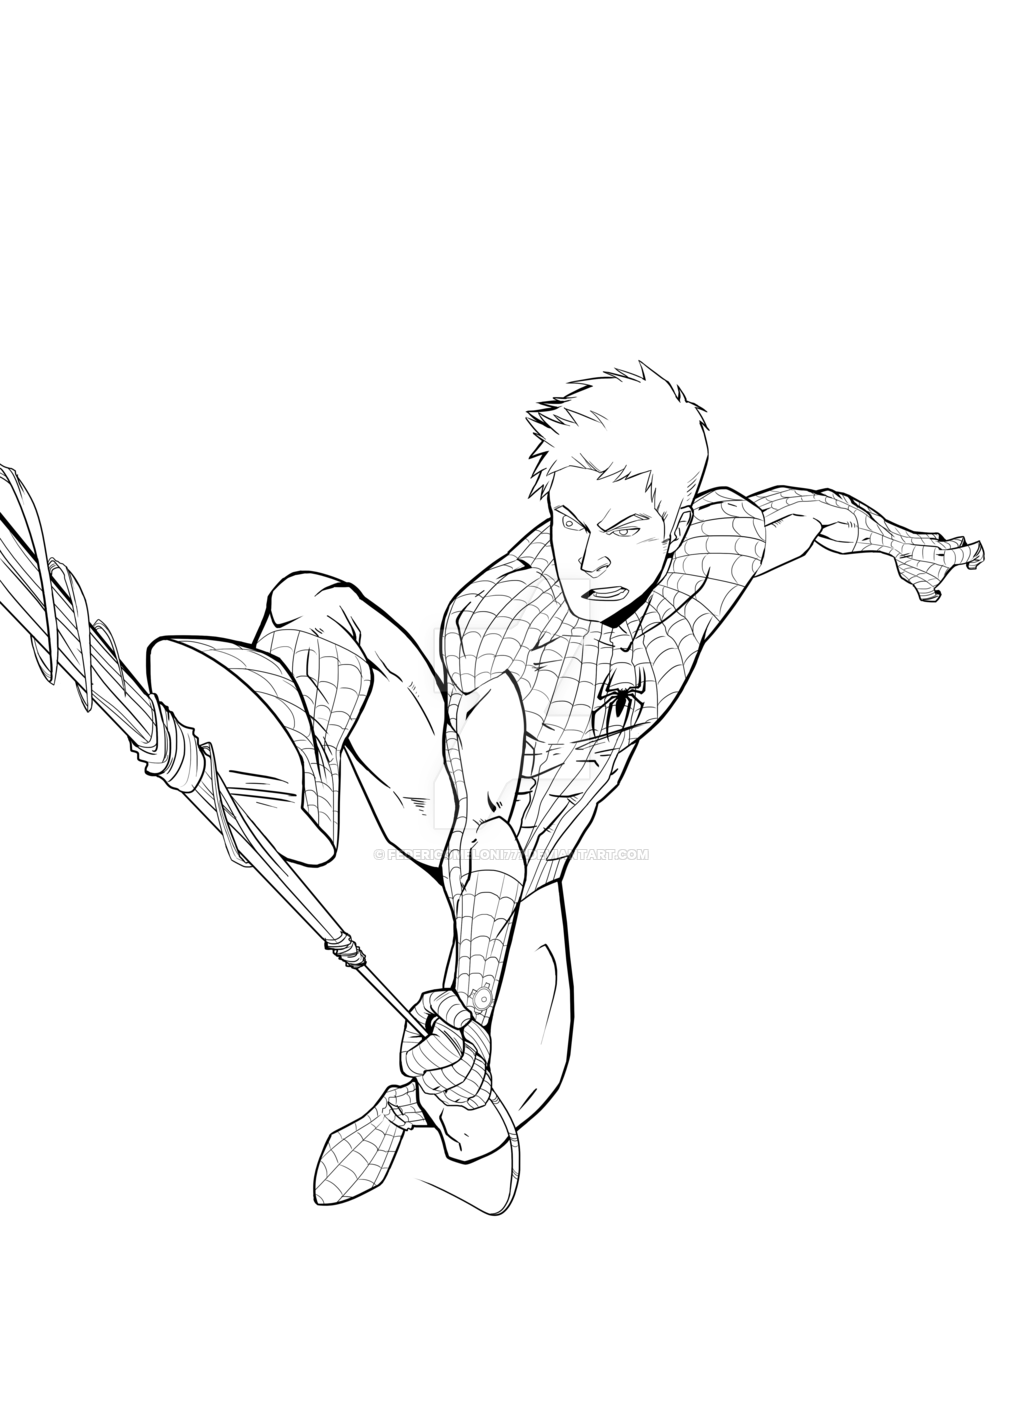 Andrew Garfield Coloring Pages Pdf Printable - Spiderman Andrew Garfield Coloring Pages